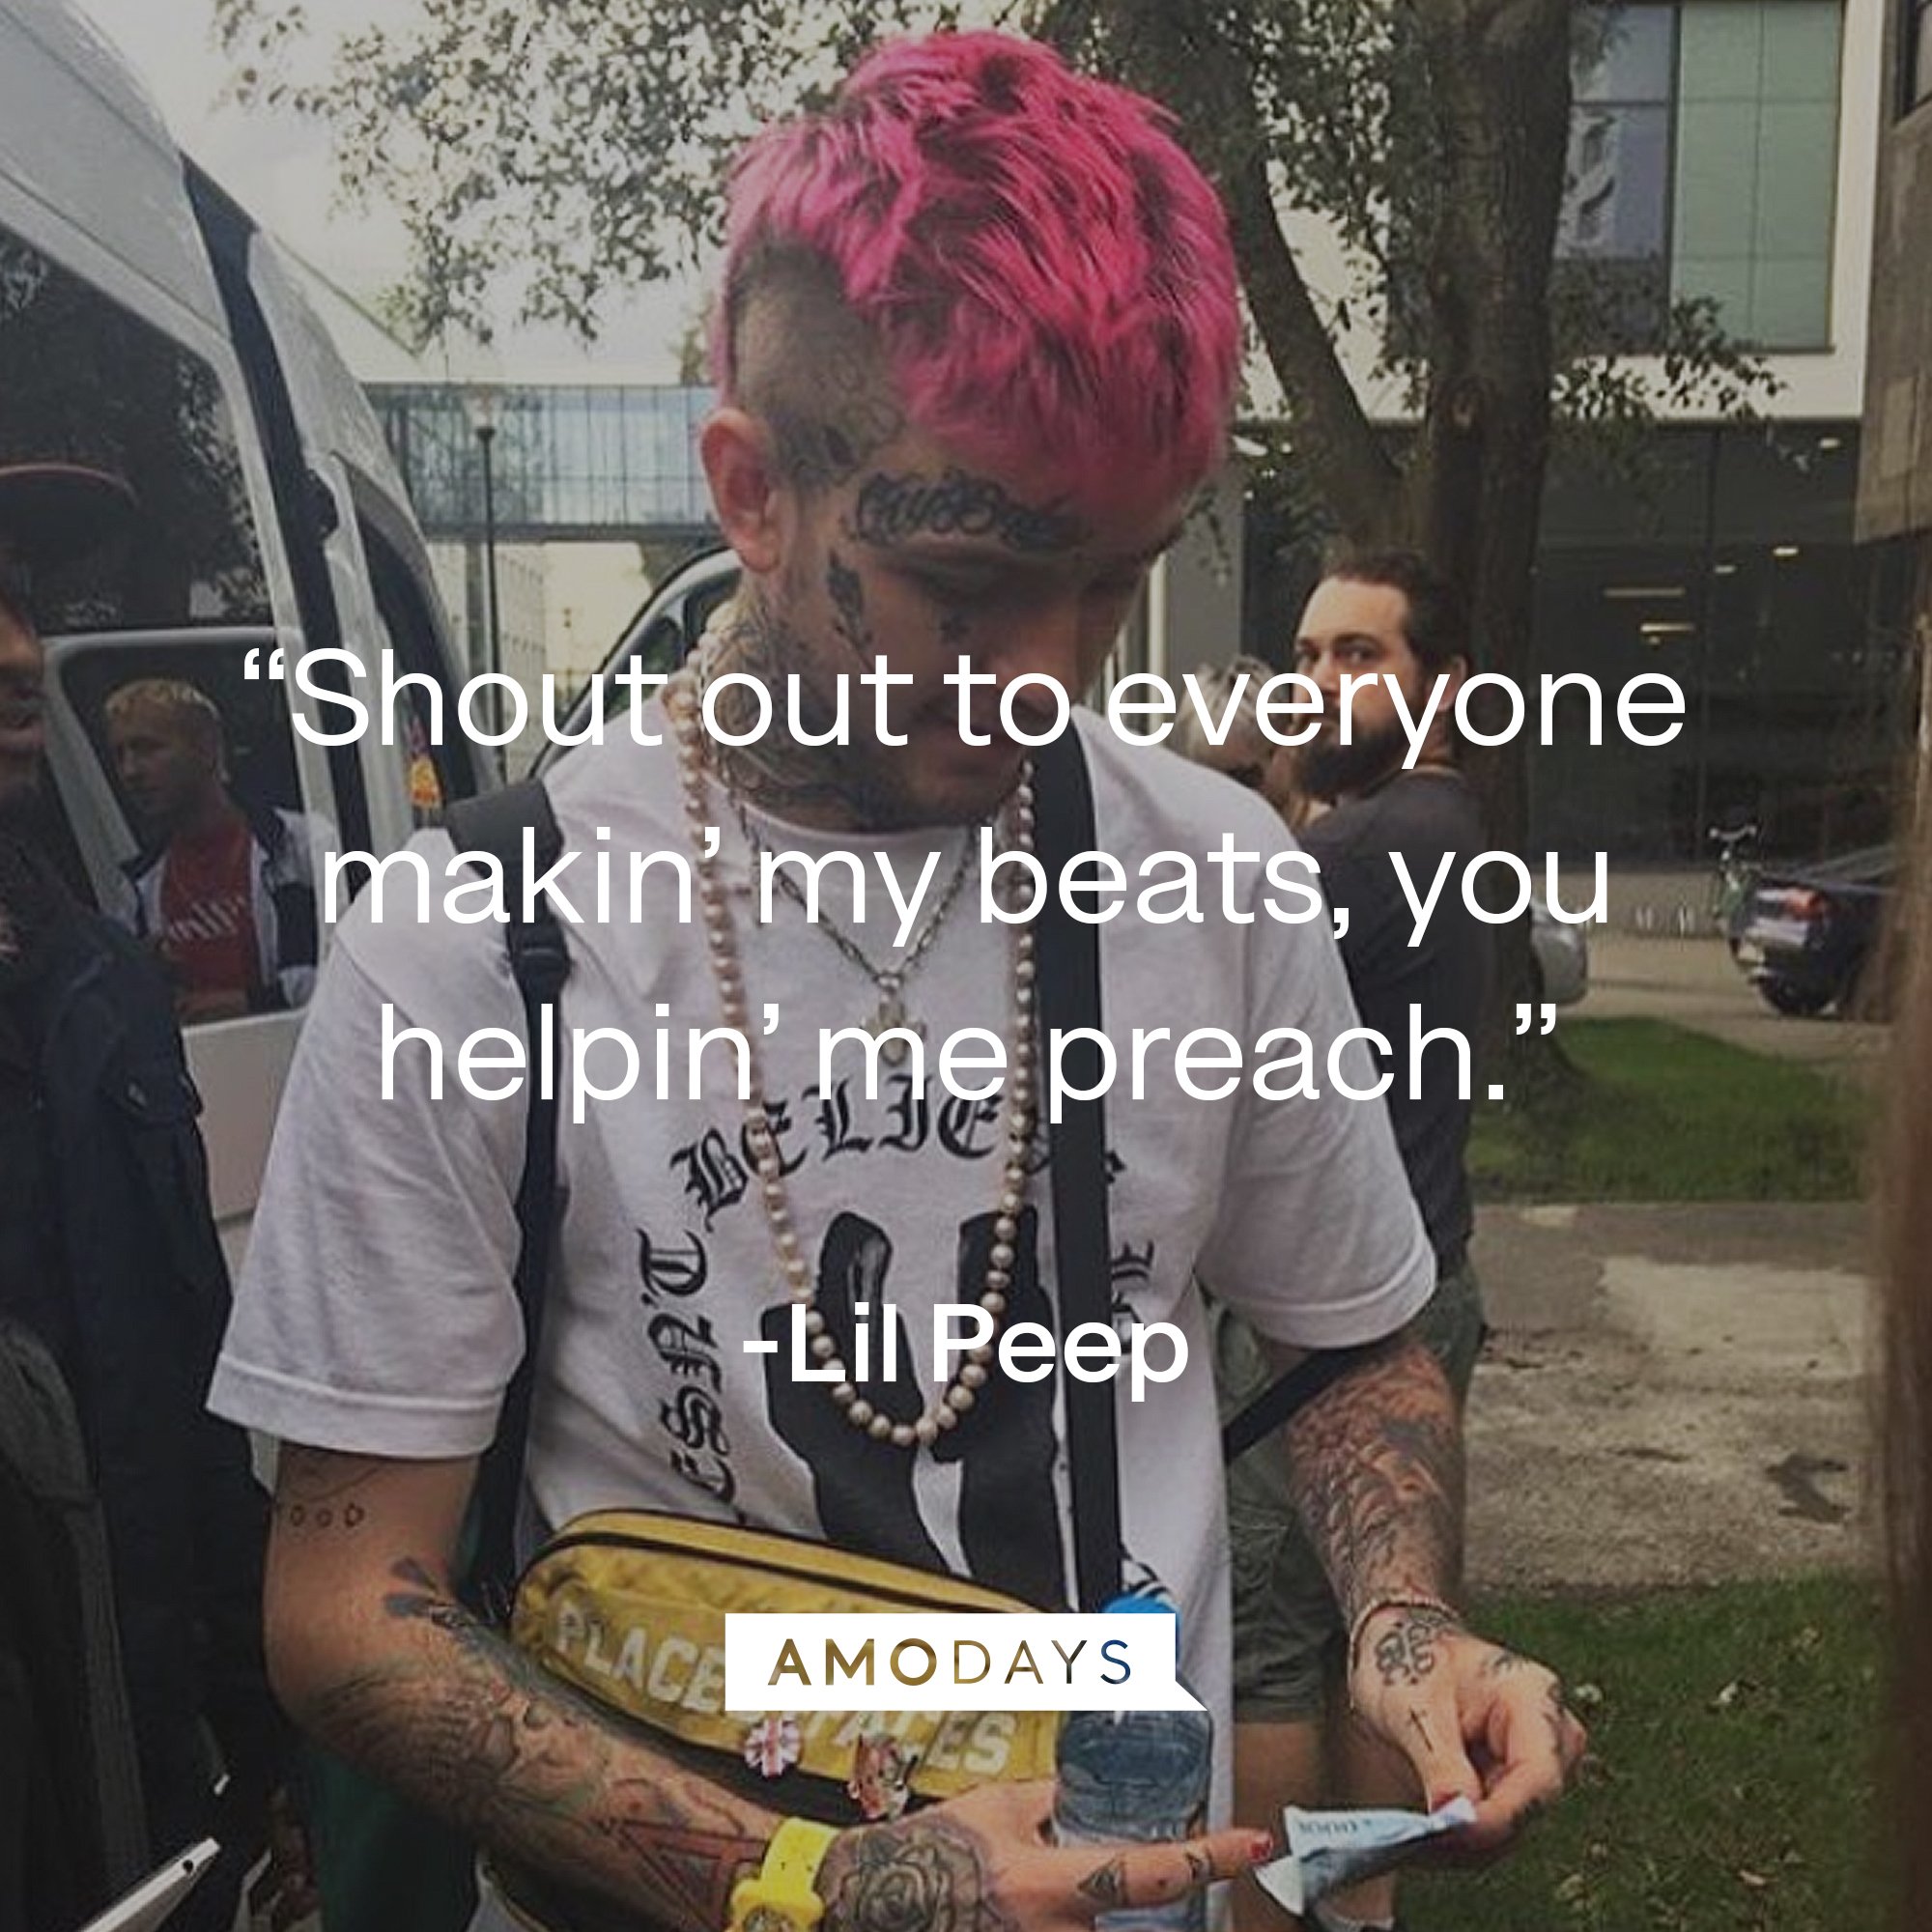 Lil Peep's quote: “Shout out to everyone makin’ my beats, you helpin’ me preach.” | Image: AmoDays